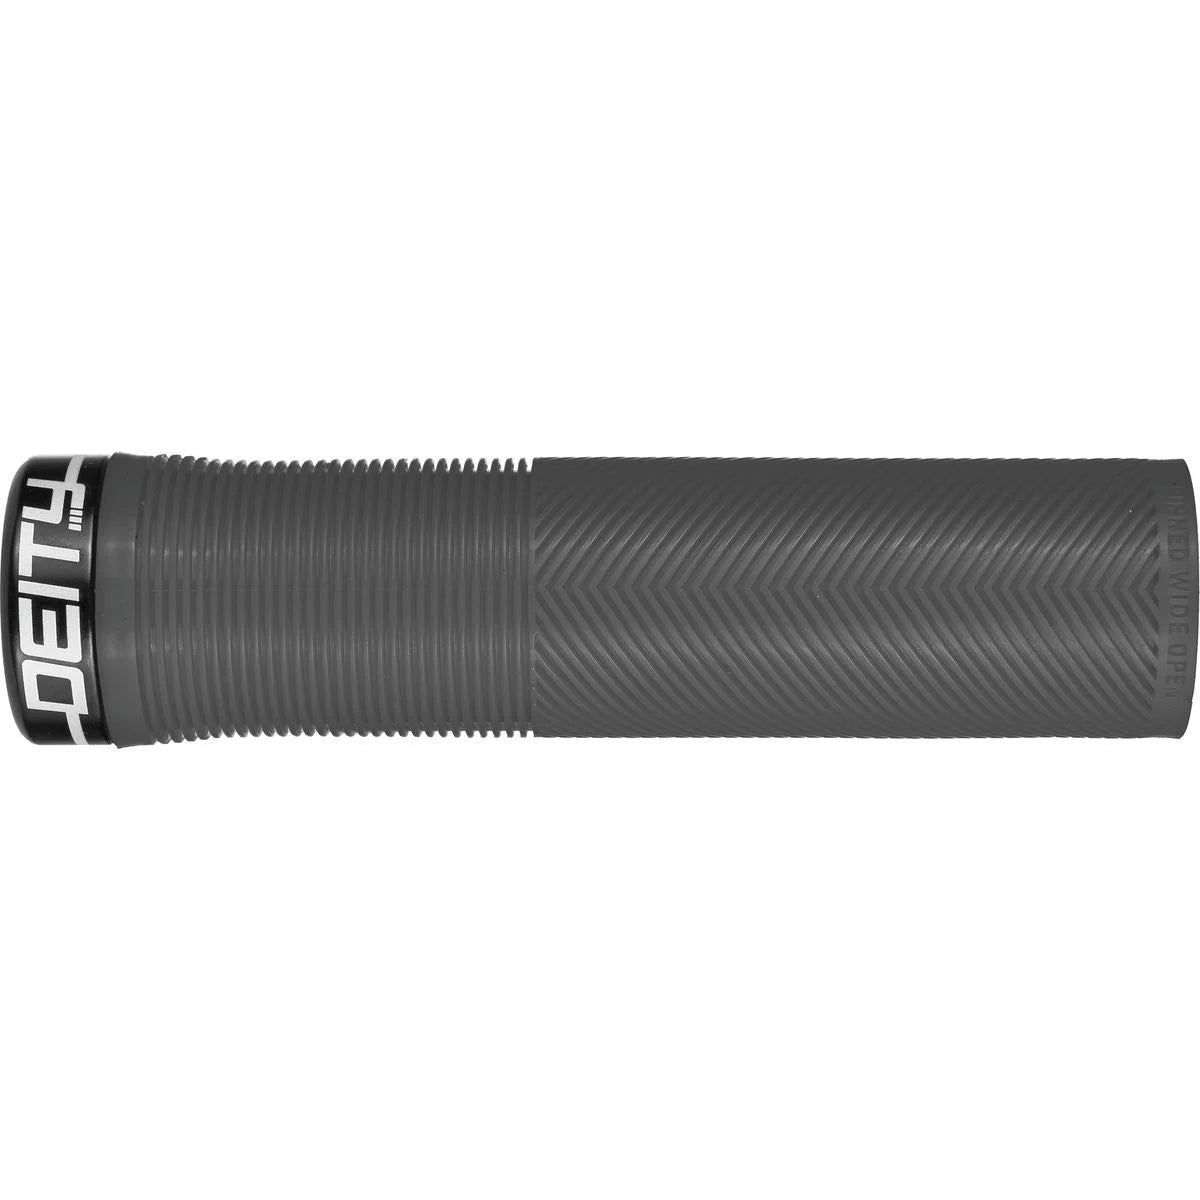 Deity Components Knuckleduster Grips, Lock-on Stealth